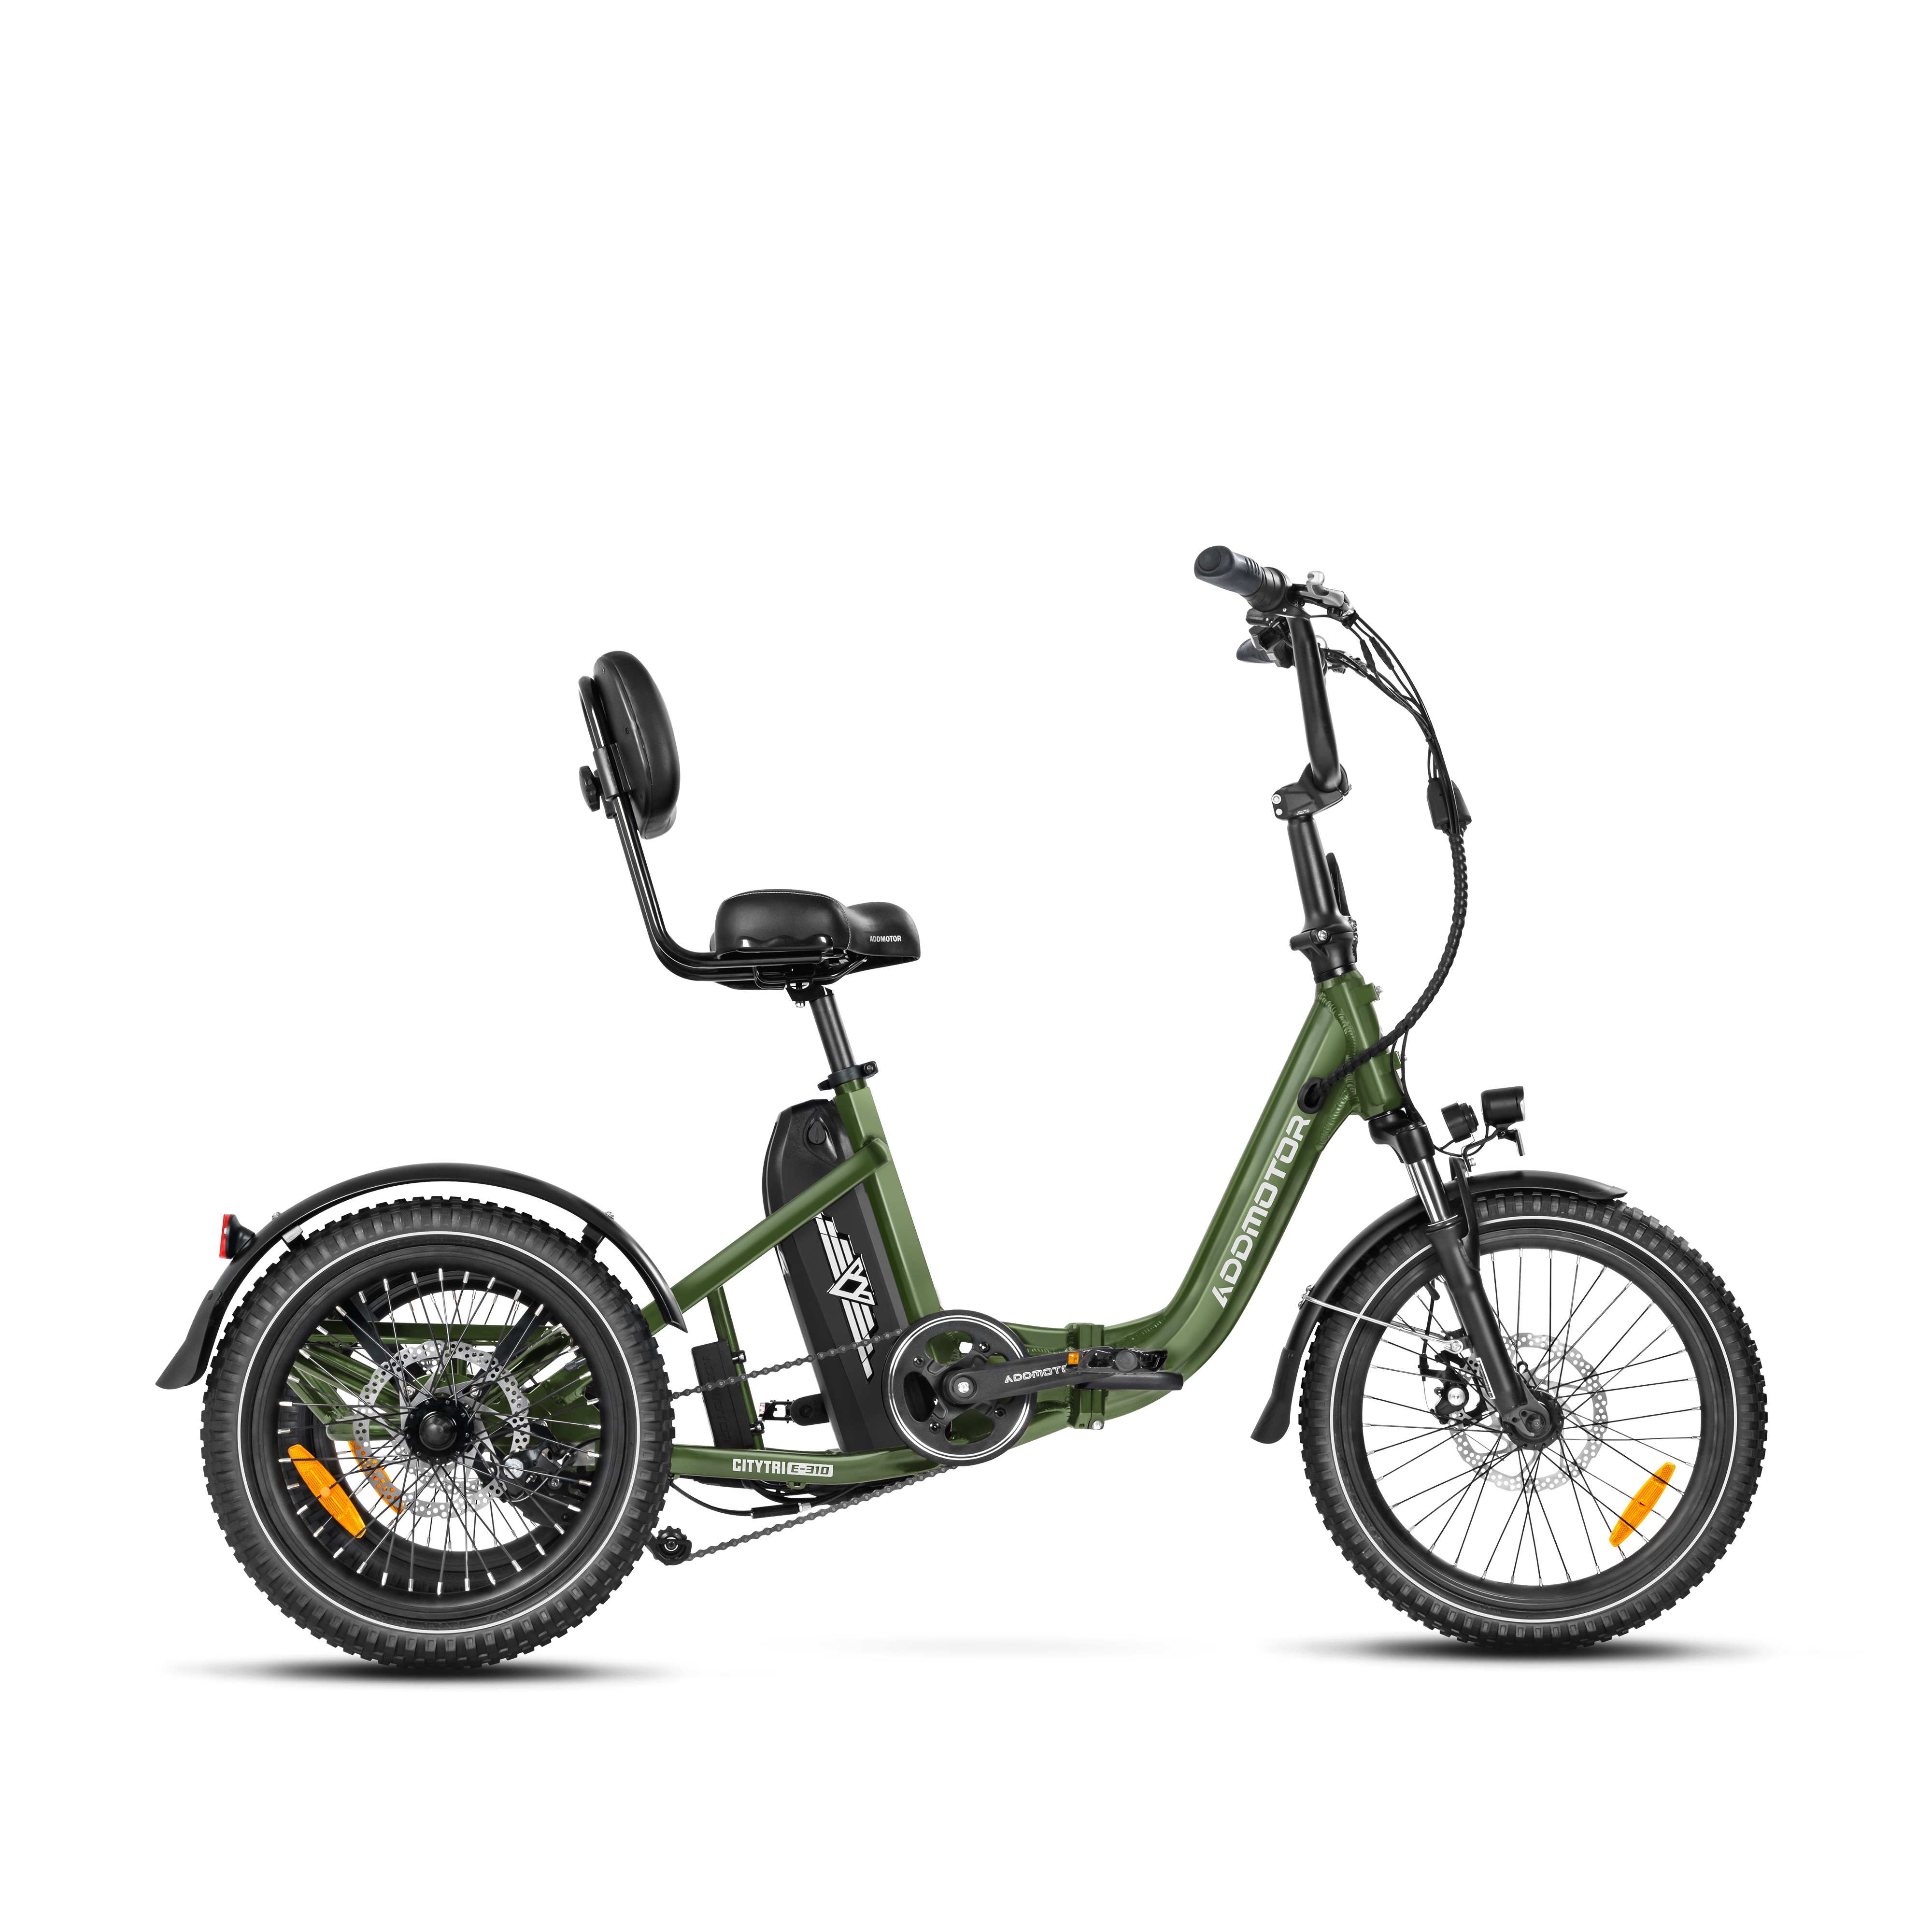 Addmotor Citytri E-310 Electric Trike with 750W 20Ah Best Electric Tricycle Under $2000 Up To 90 Miles - Army Green